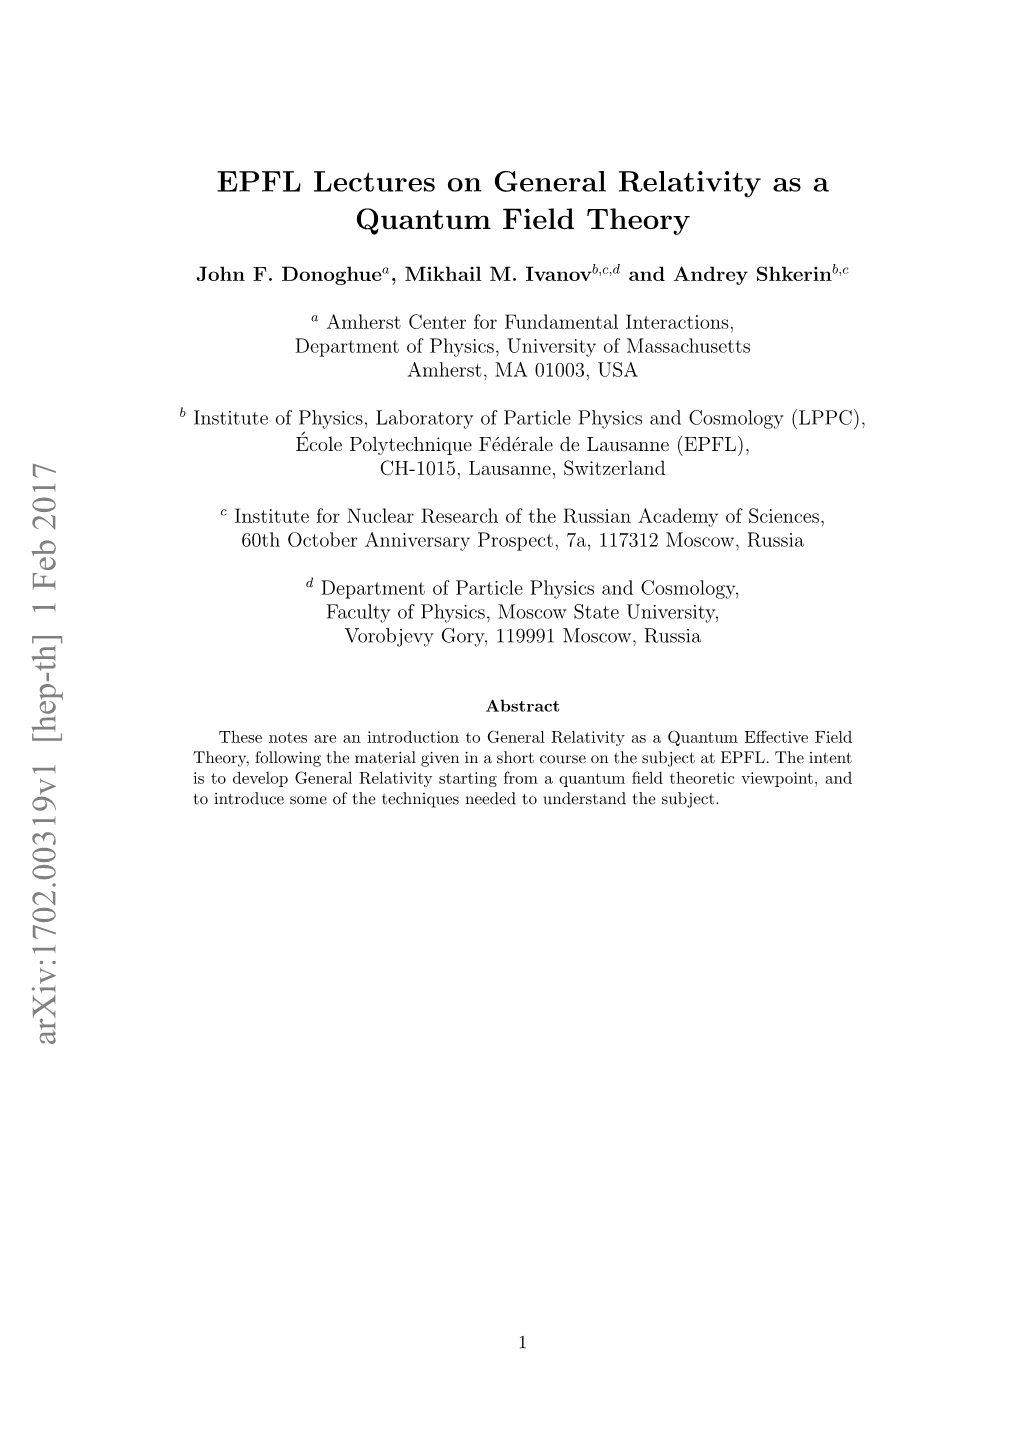 EPFL Lectures on General Relativity As a Quantum Field Theory